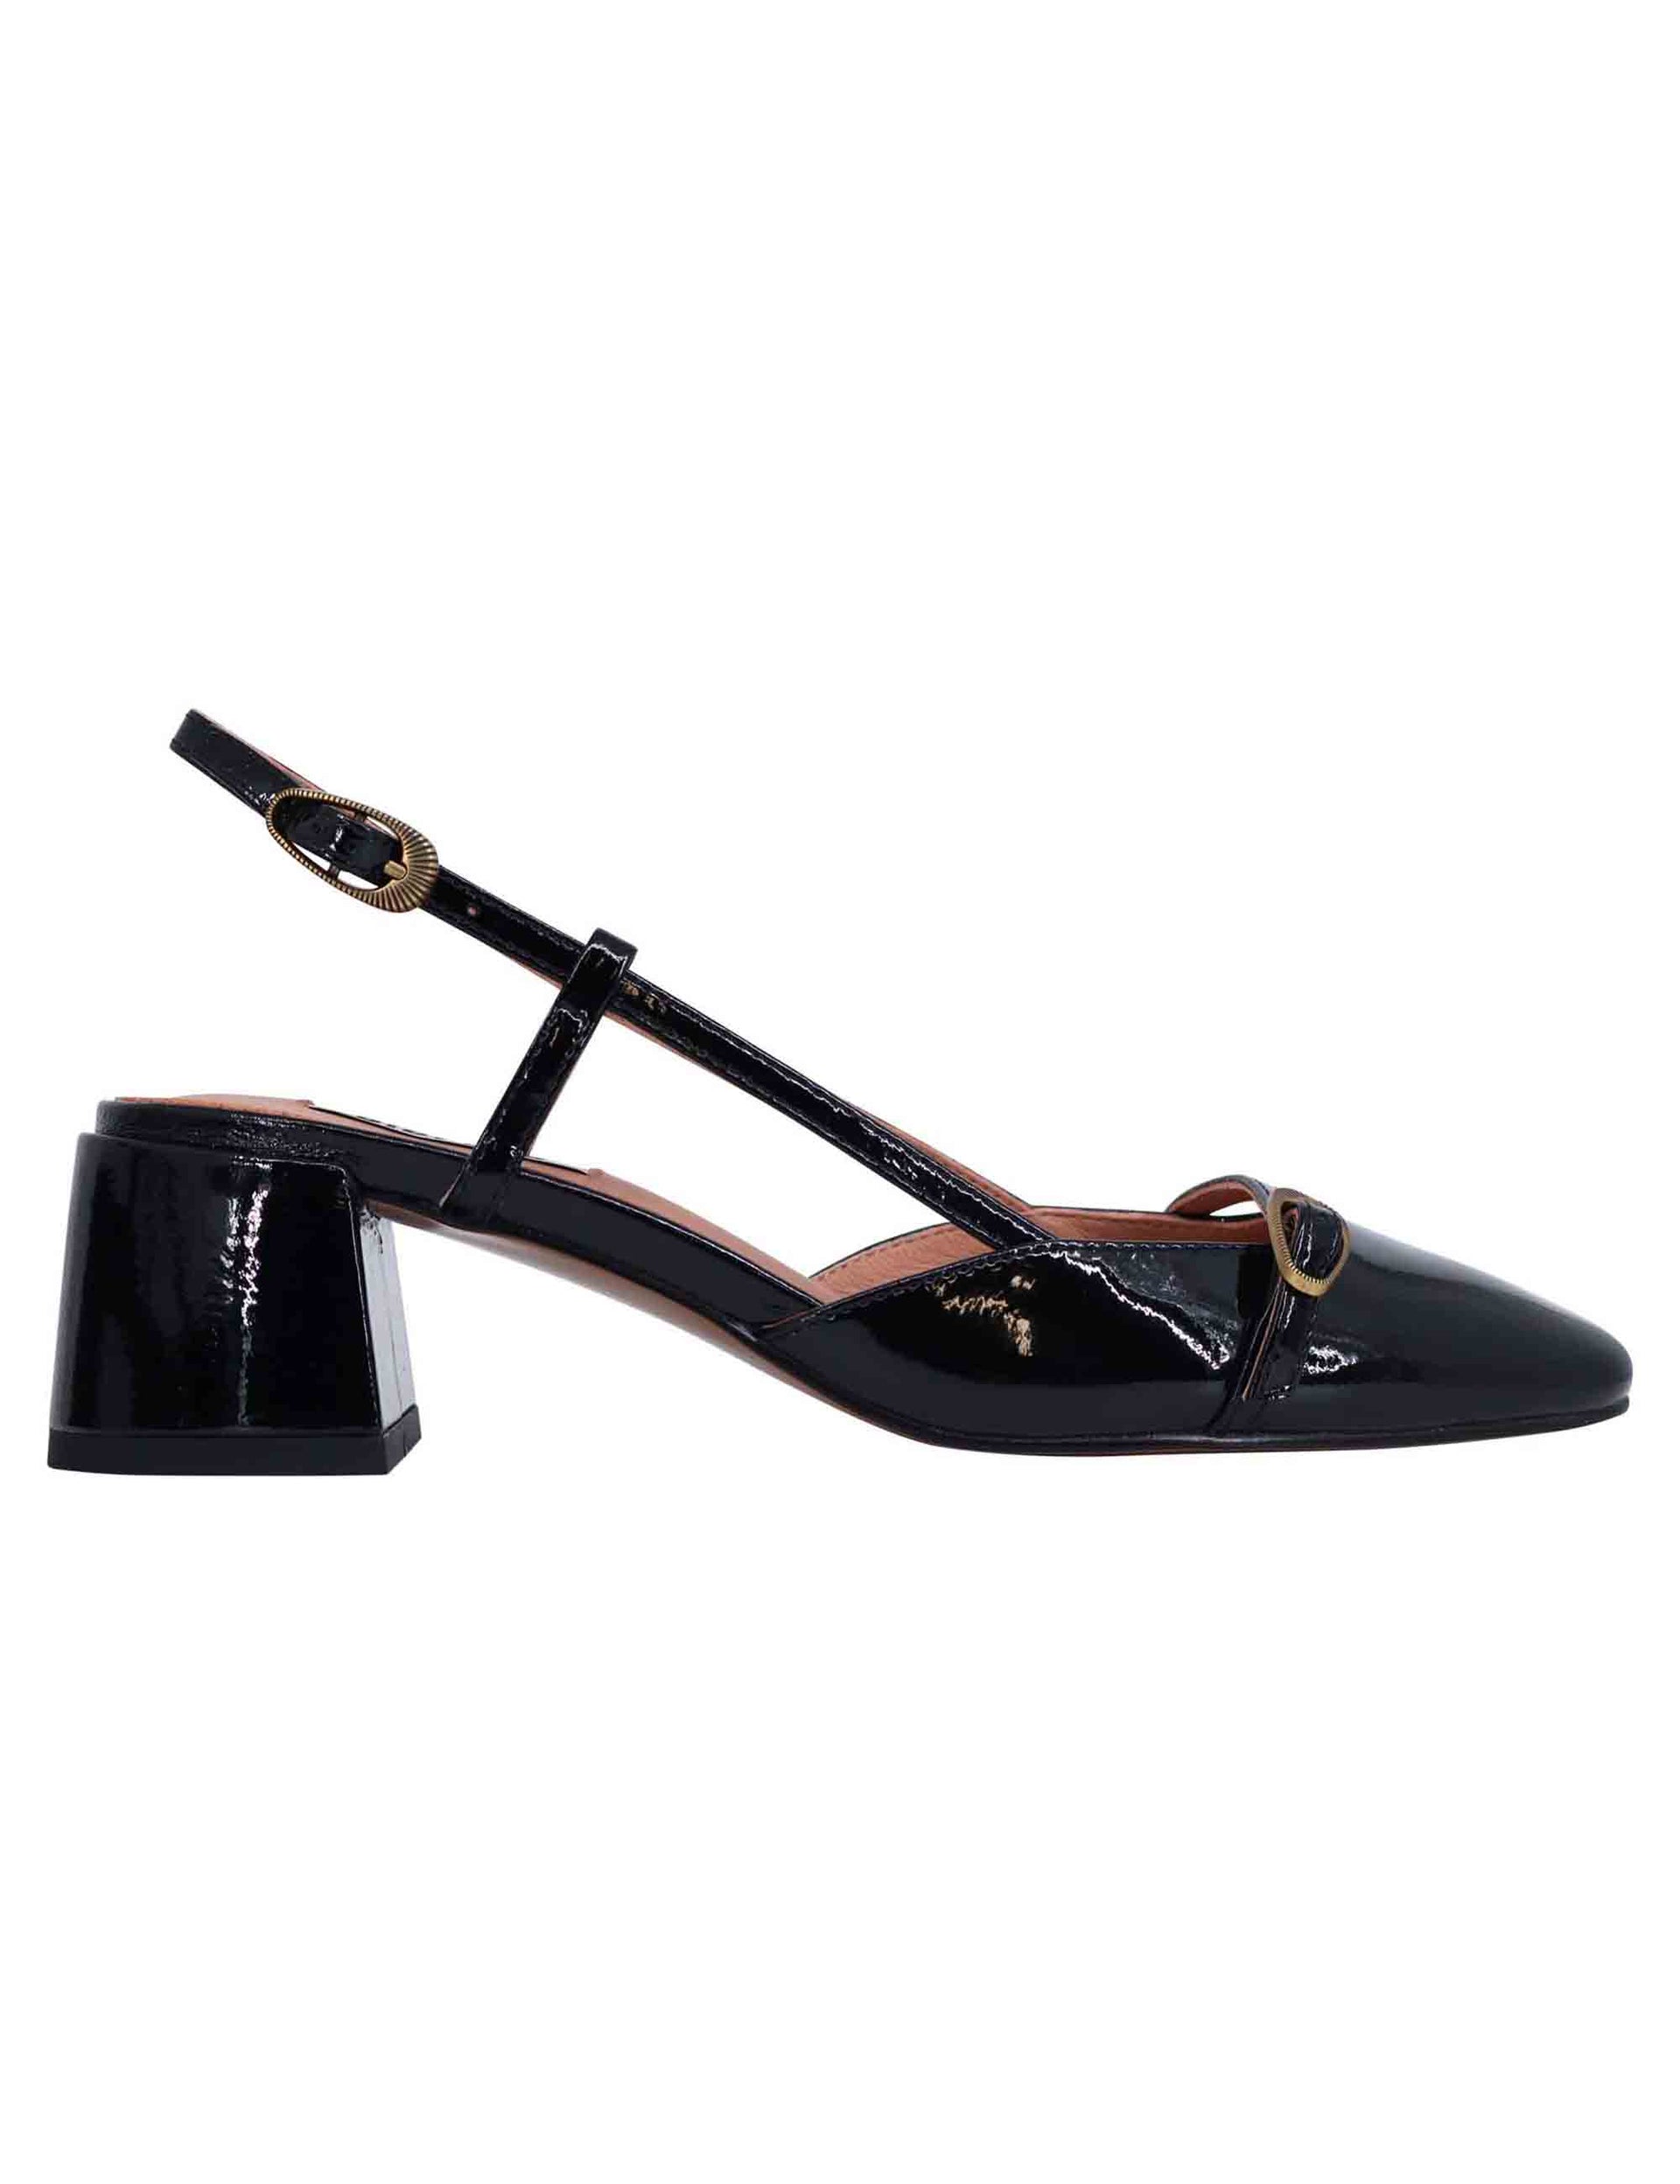 Women's black patent slingback pumps with Patty buckle